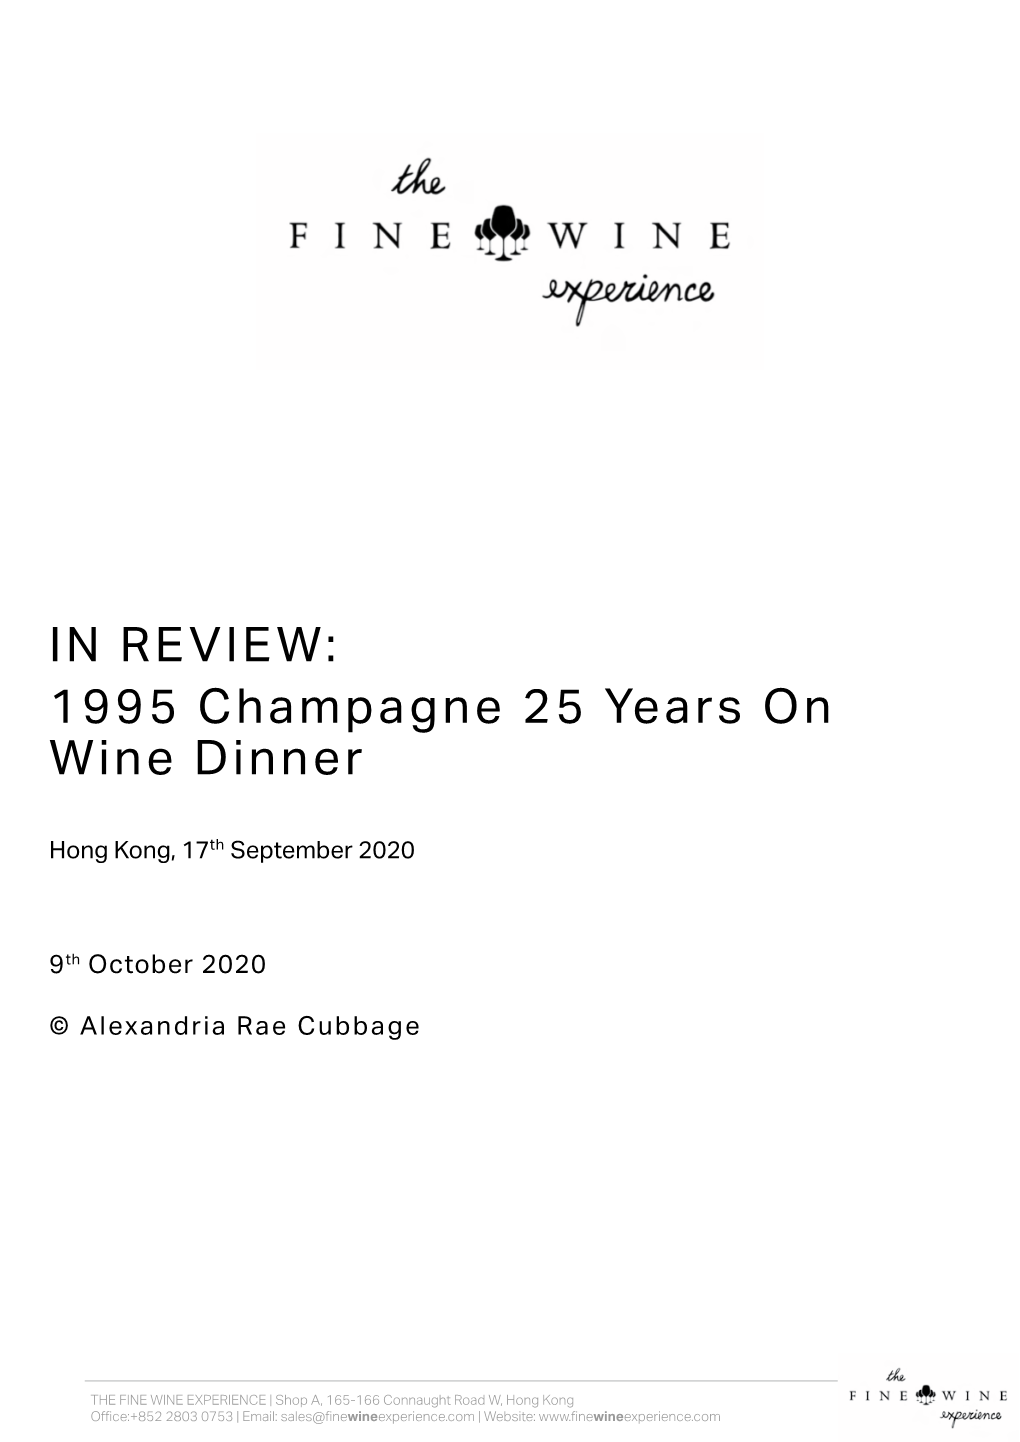 IN REVIEW: 1995 Champagne 25 Years on Wine Dinner